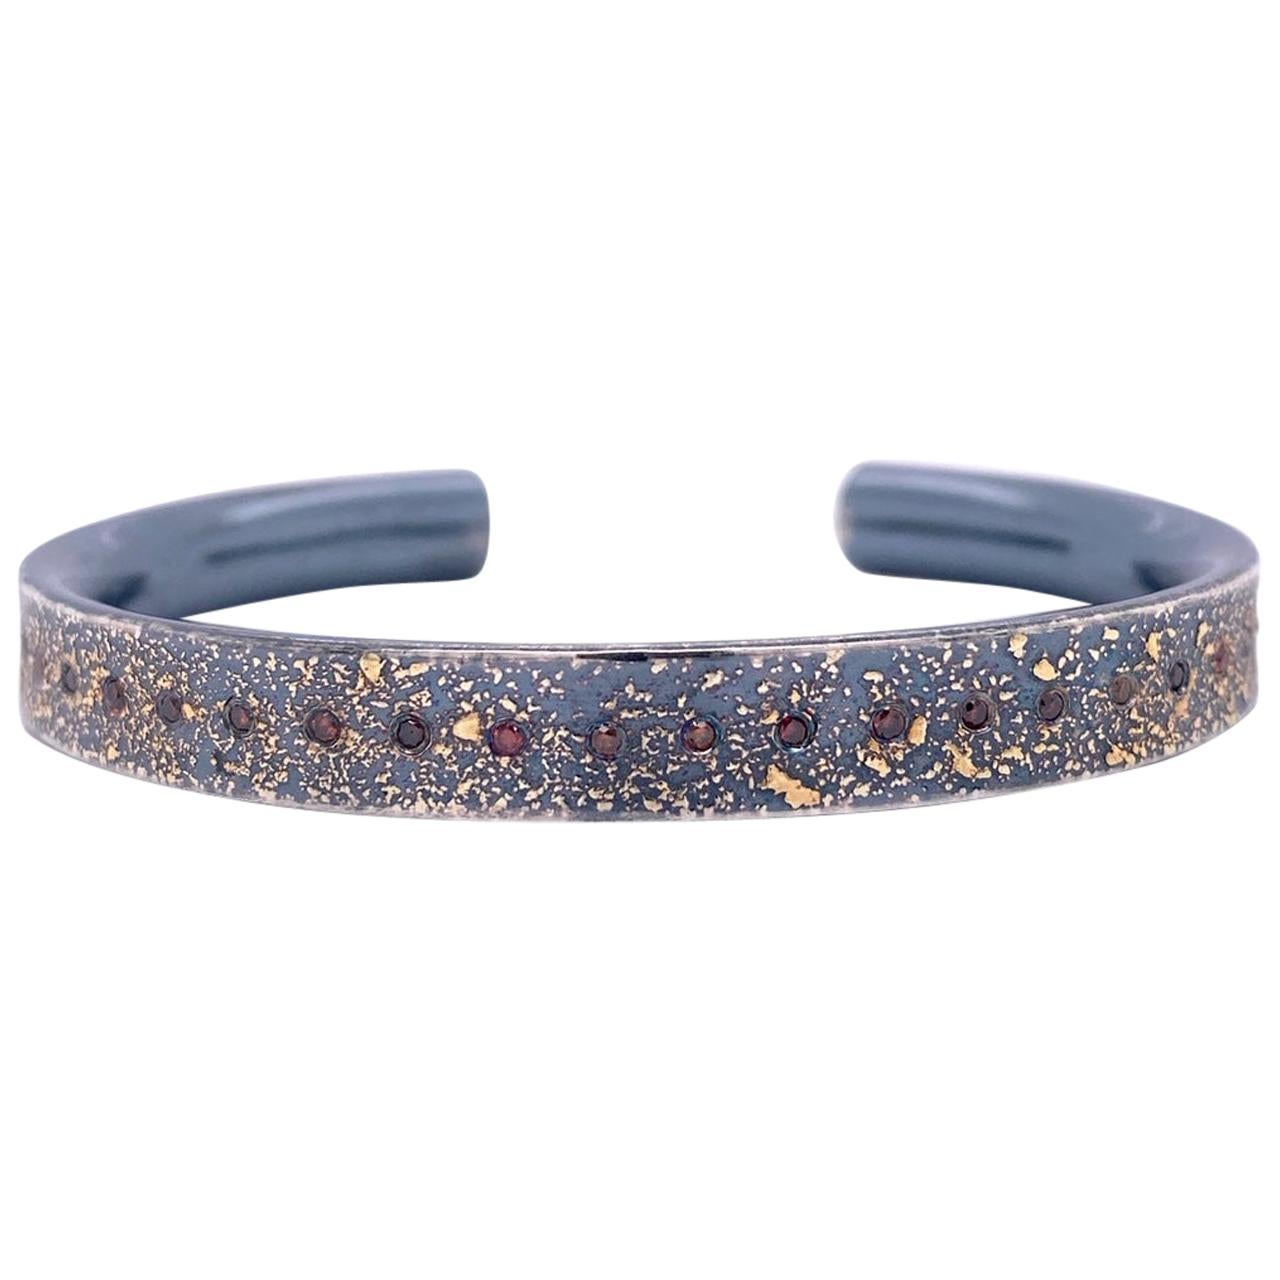 Oxidized Sterling Silver and 24k Yellow Gold Narrow Cuff with Cabernet Diamonds